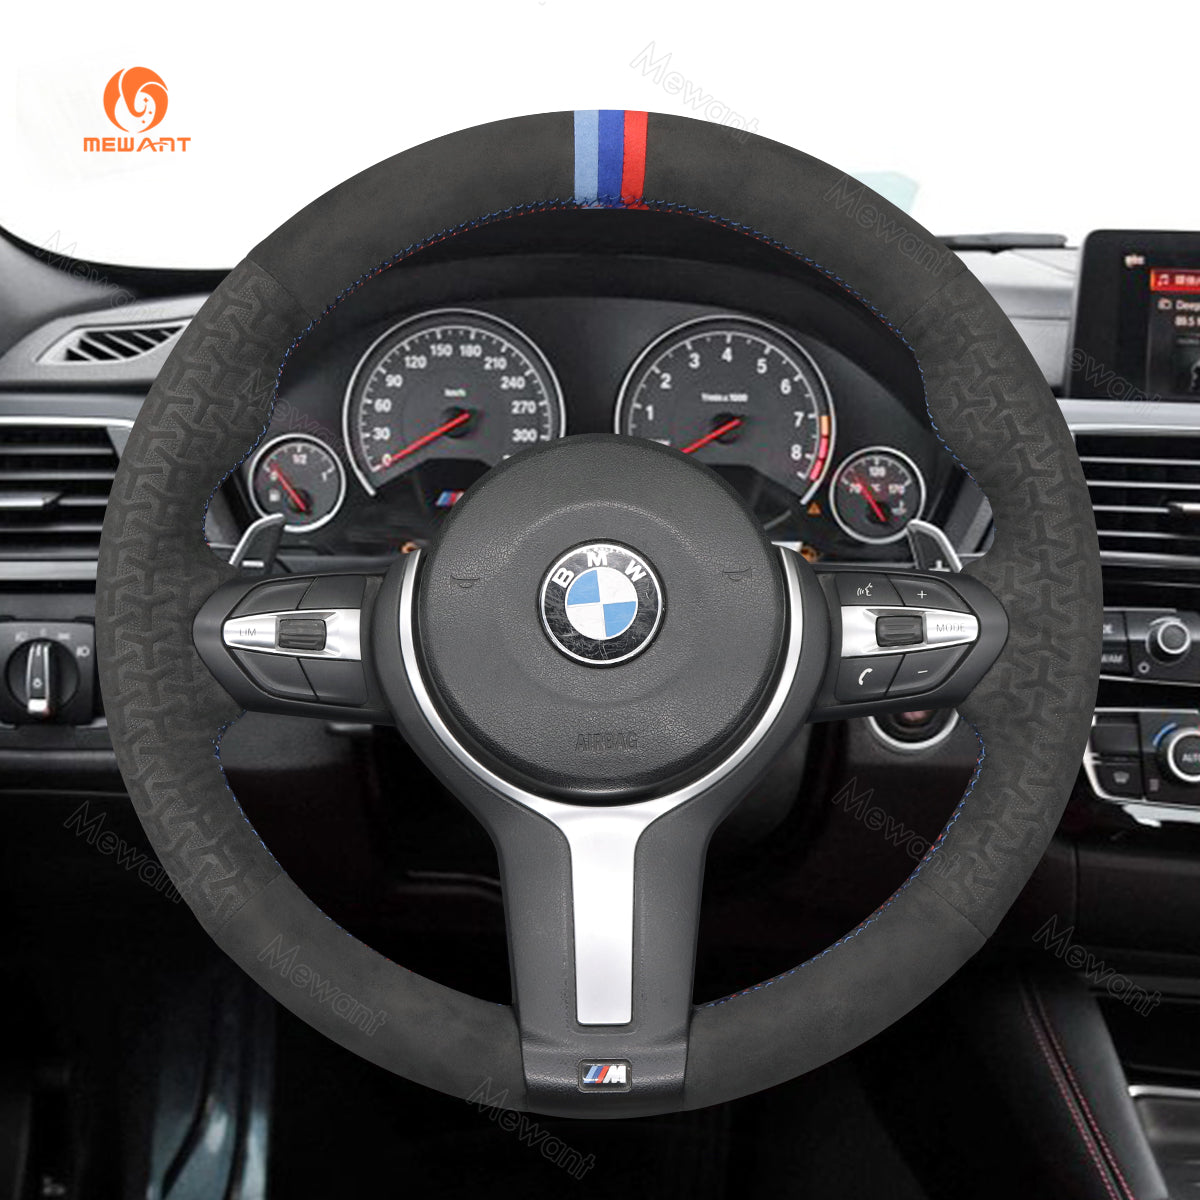 Car Steering Wheel Cover for BMW M Sport F30 F31 F34 F10 F11 F07 / F12 F13 F06 X3 F25 X4 F26 X5 F15 F16 F45 F46 F22 F23